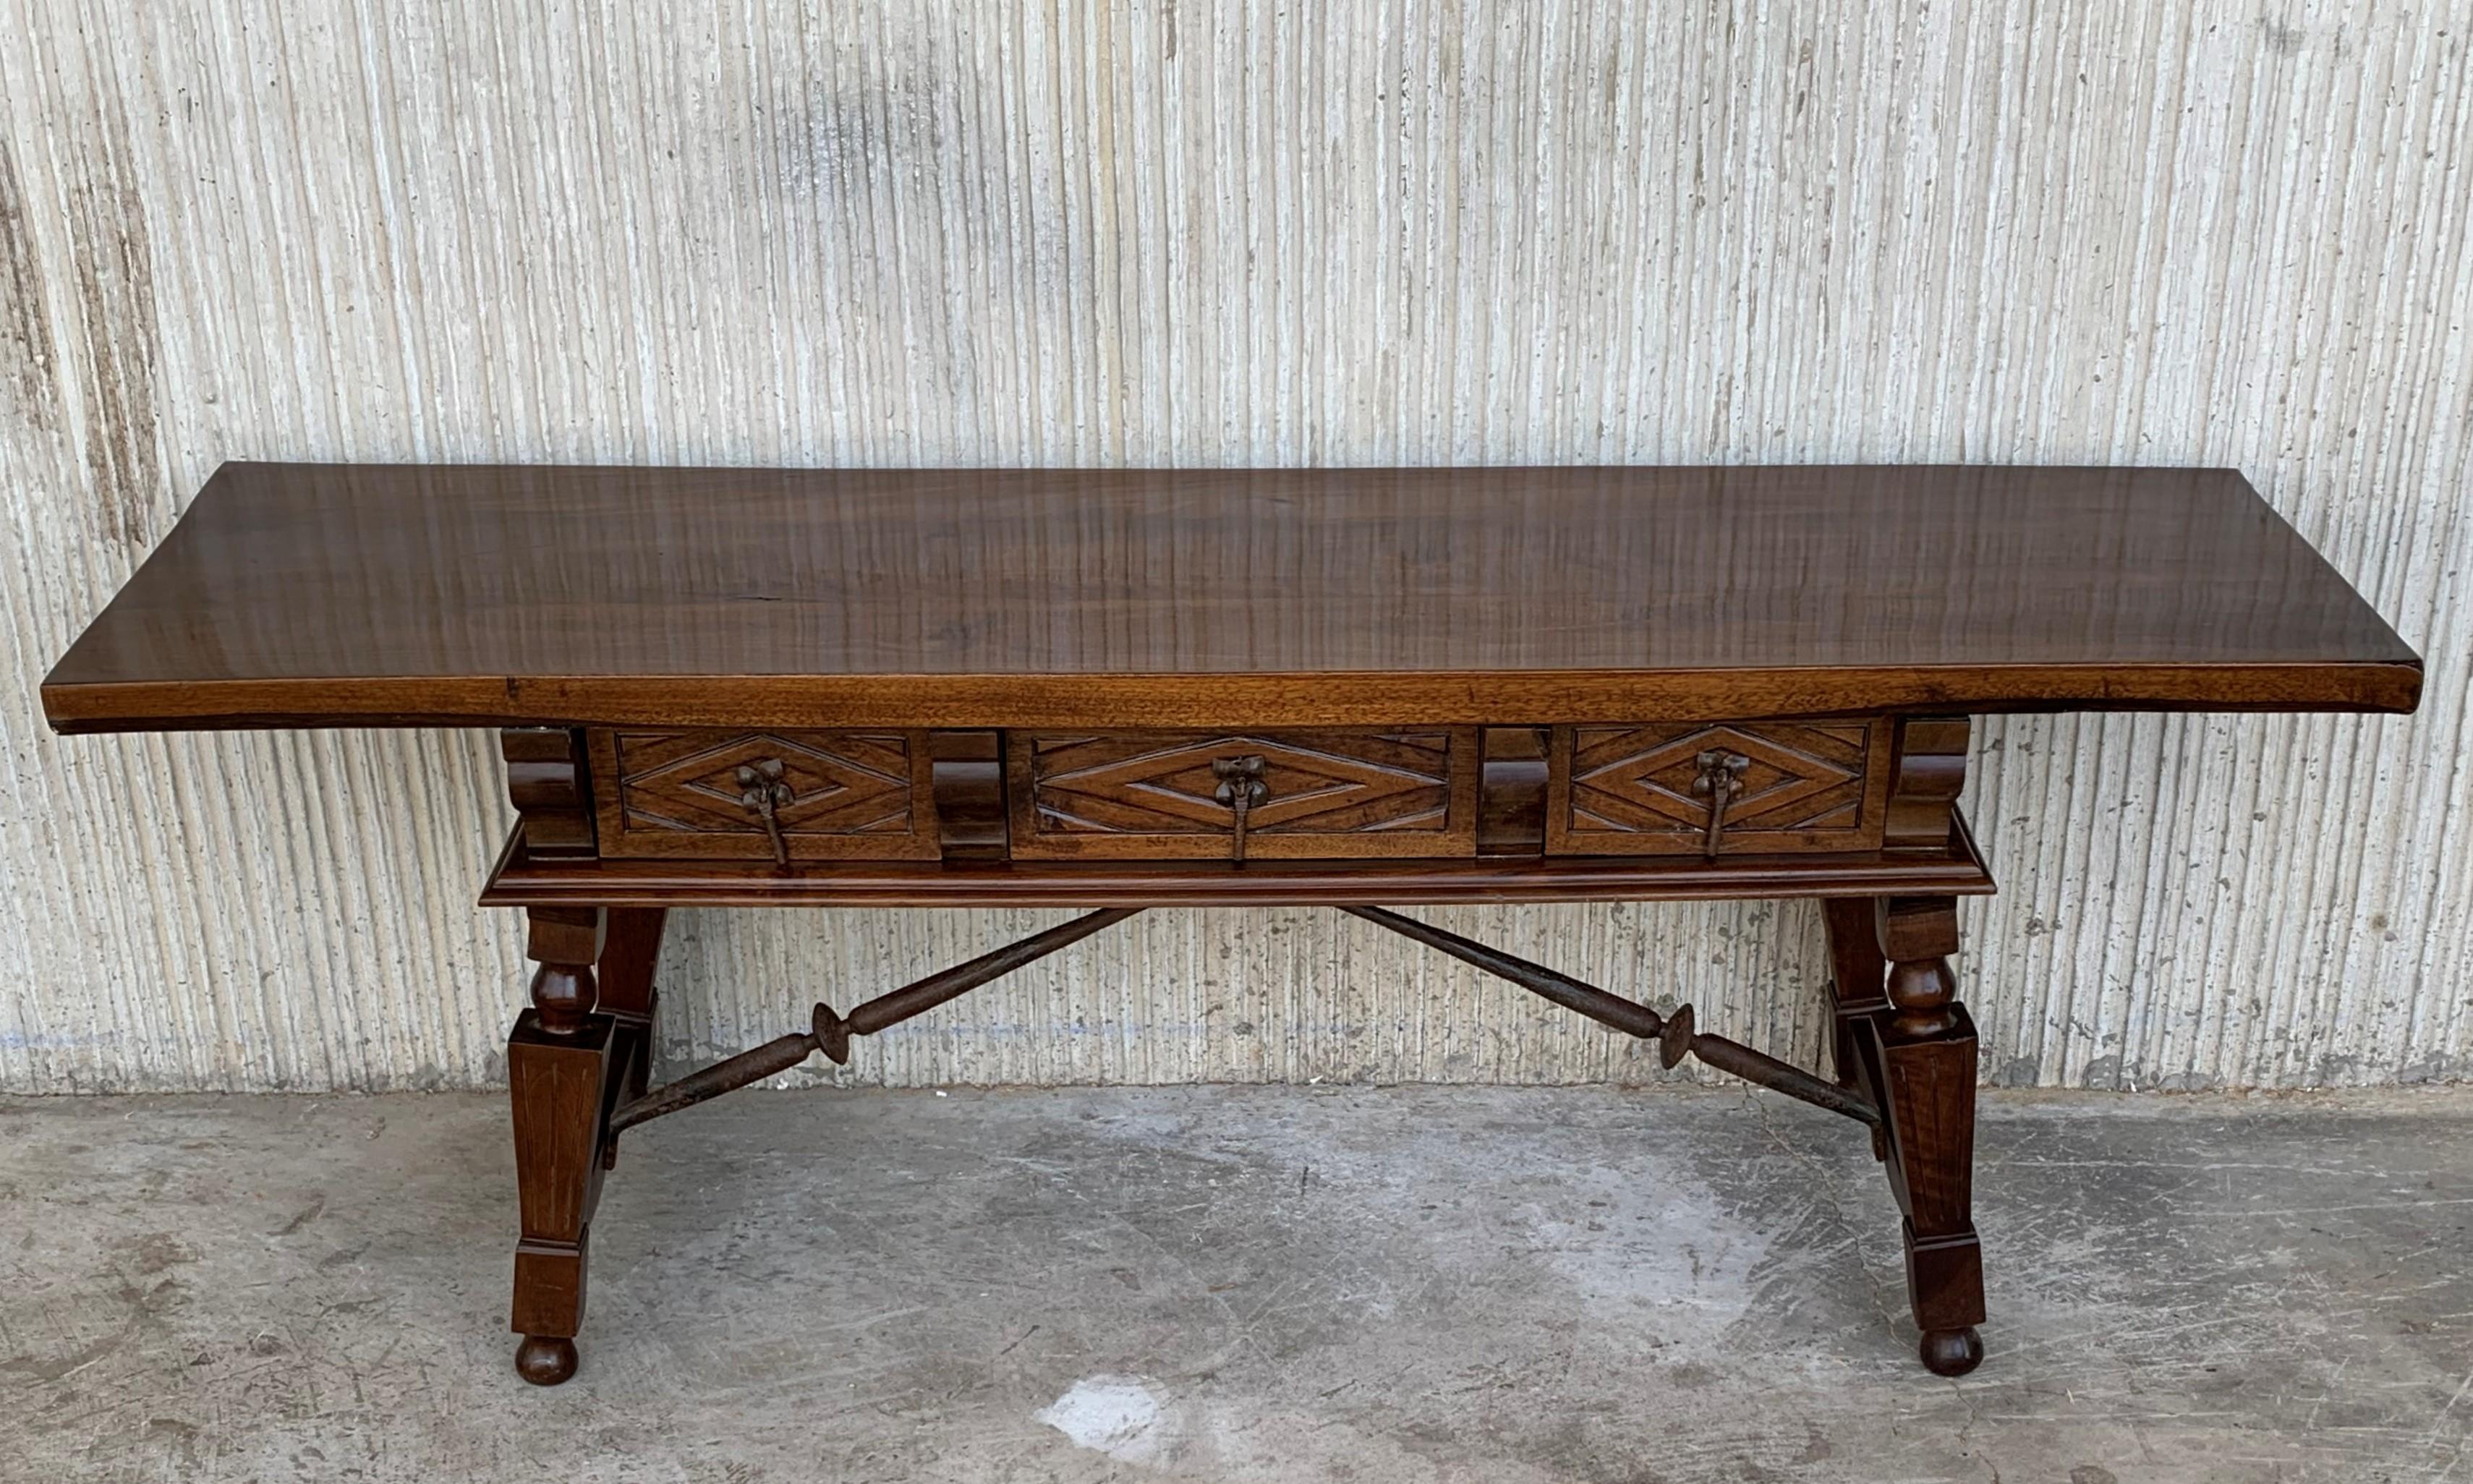 19th century Spanish bench or low console table with carved drawers you can open in both sides
Original iron pull hardware and iron stretcher
That back has the same picture than the front.